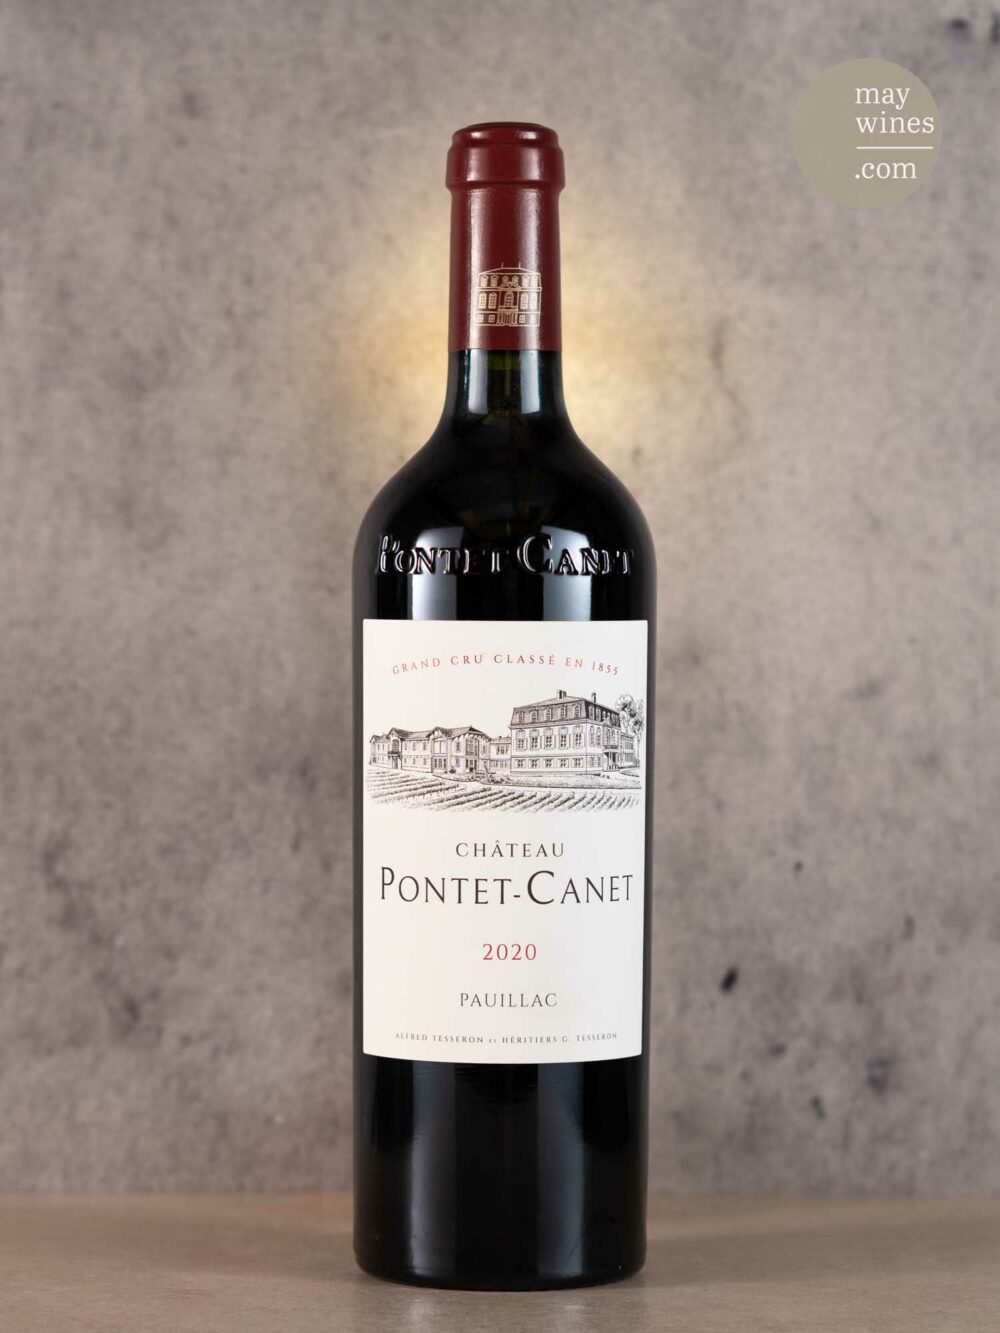 May Wines – Rotwein – 2020 Château Pontet-Canet